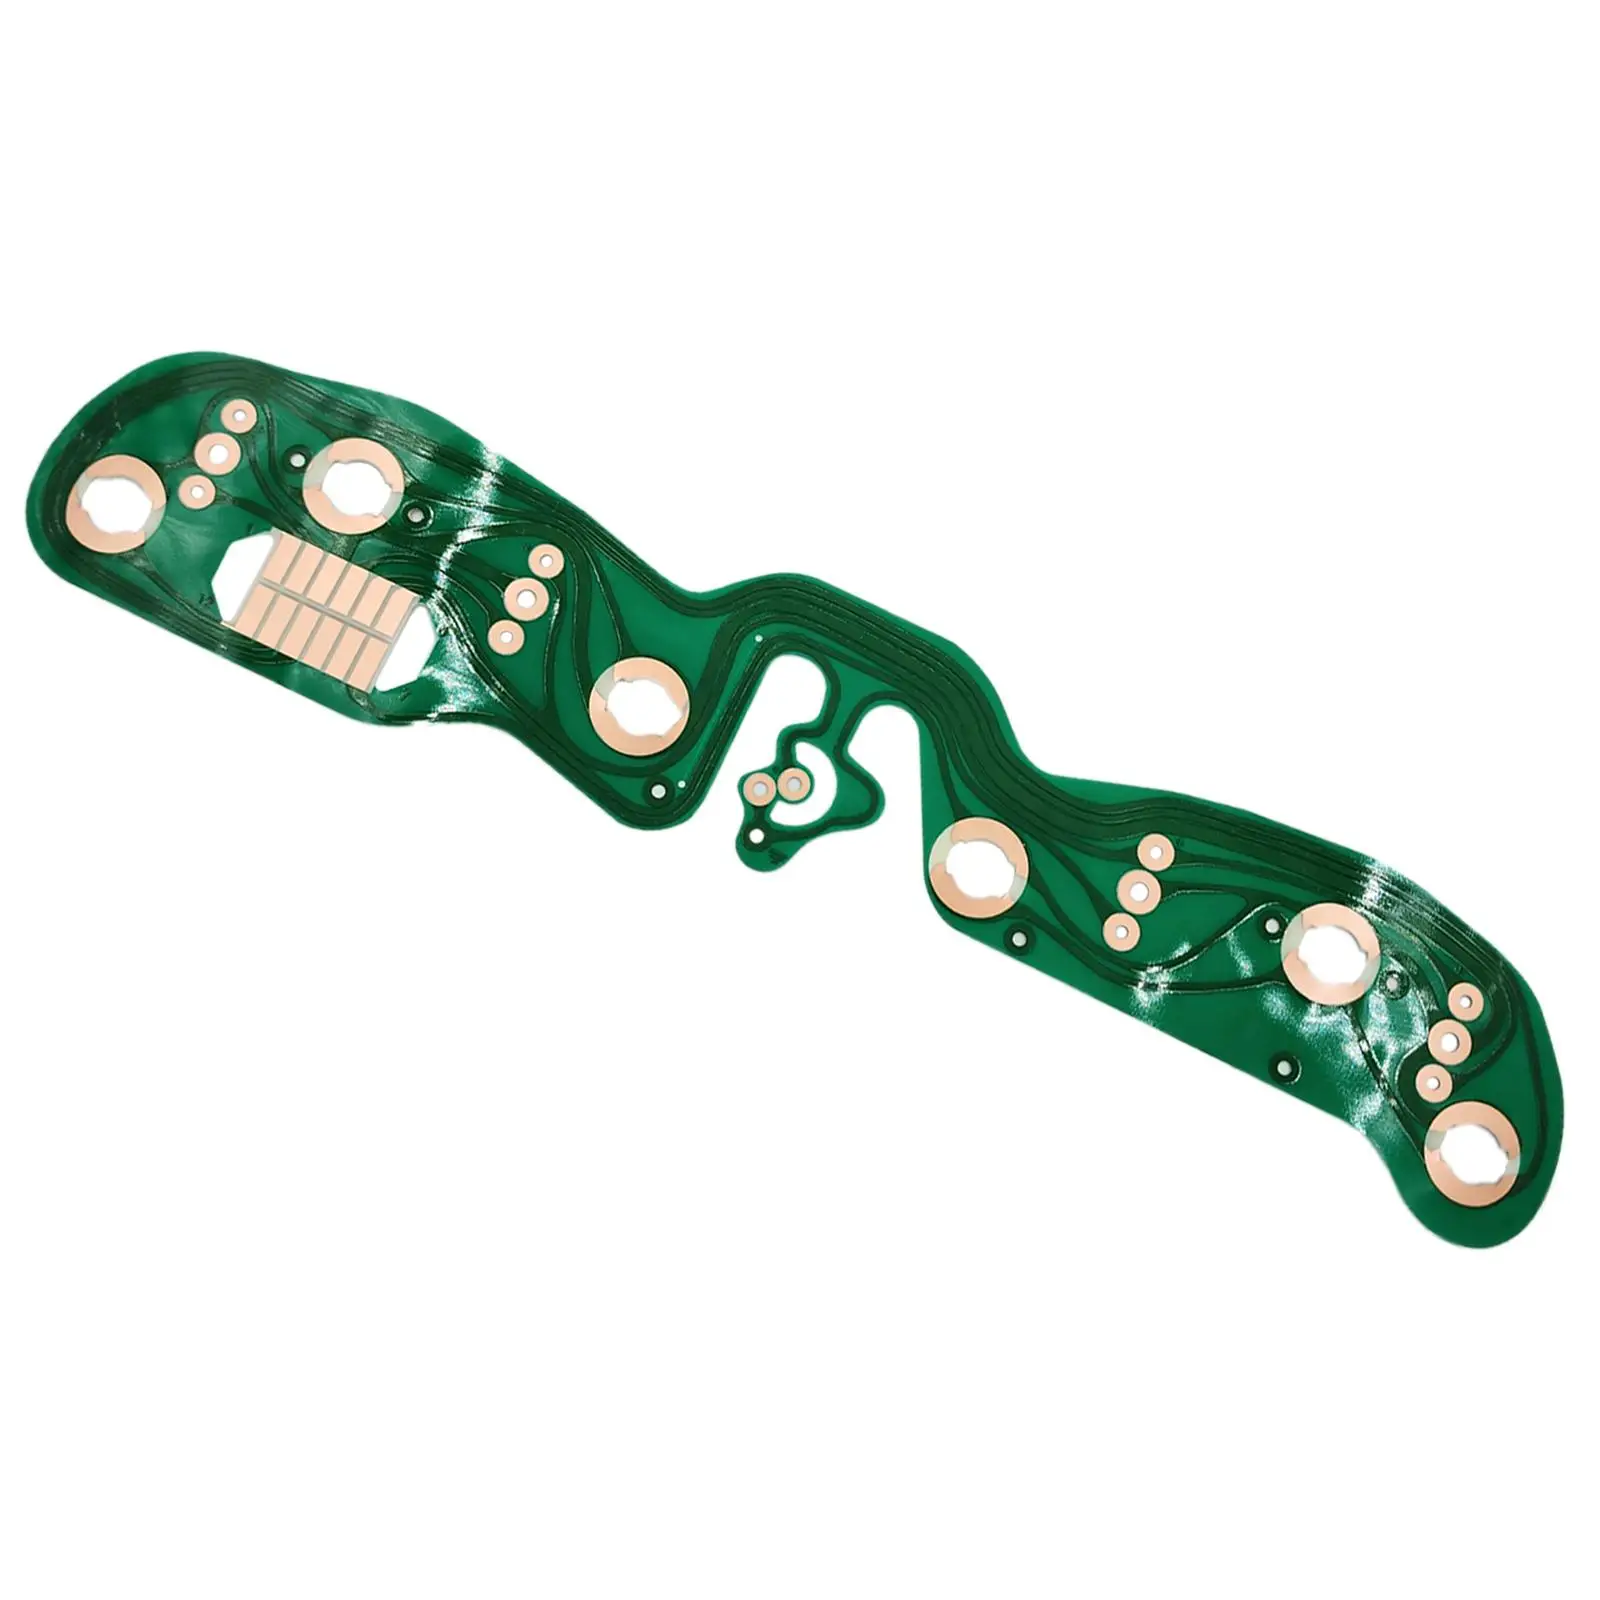 Gauges Printed Circuit Board for Jeep Wrangler Premium High Performance